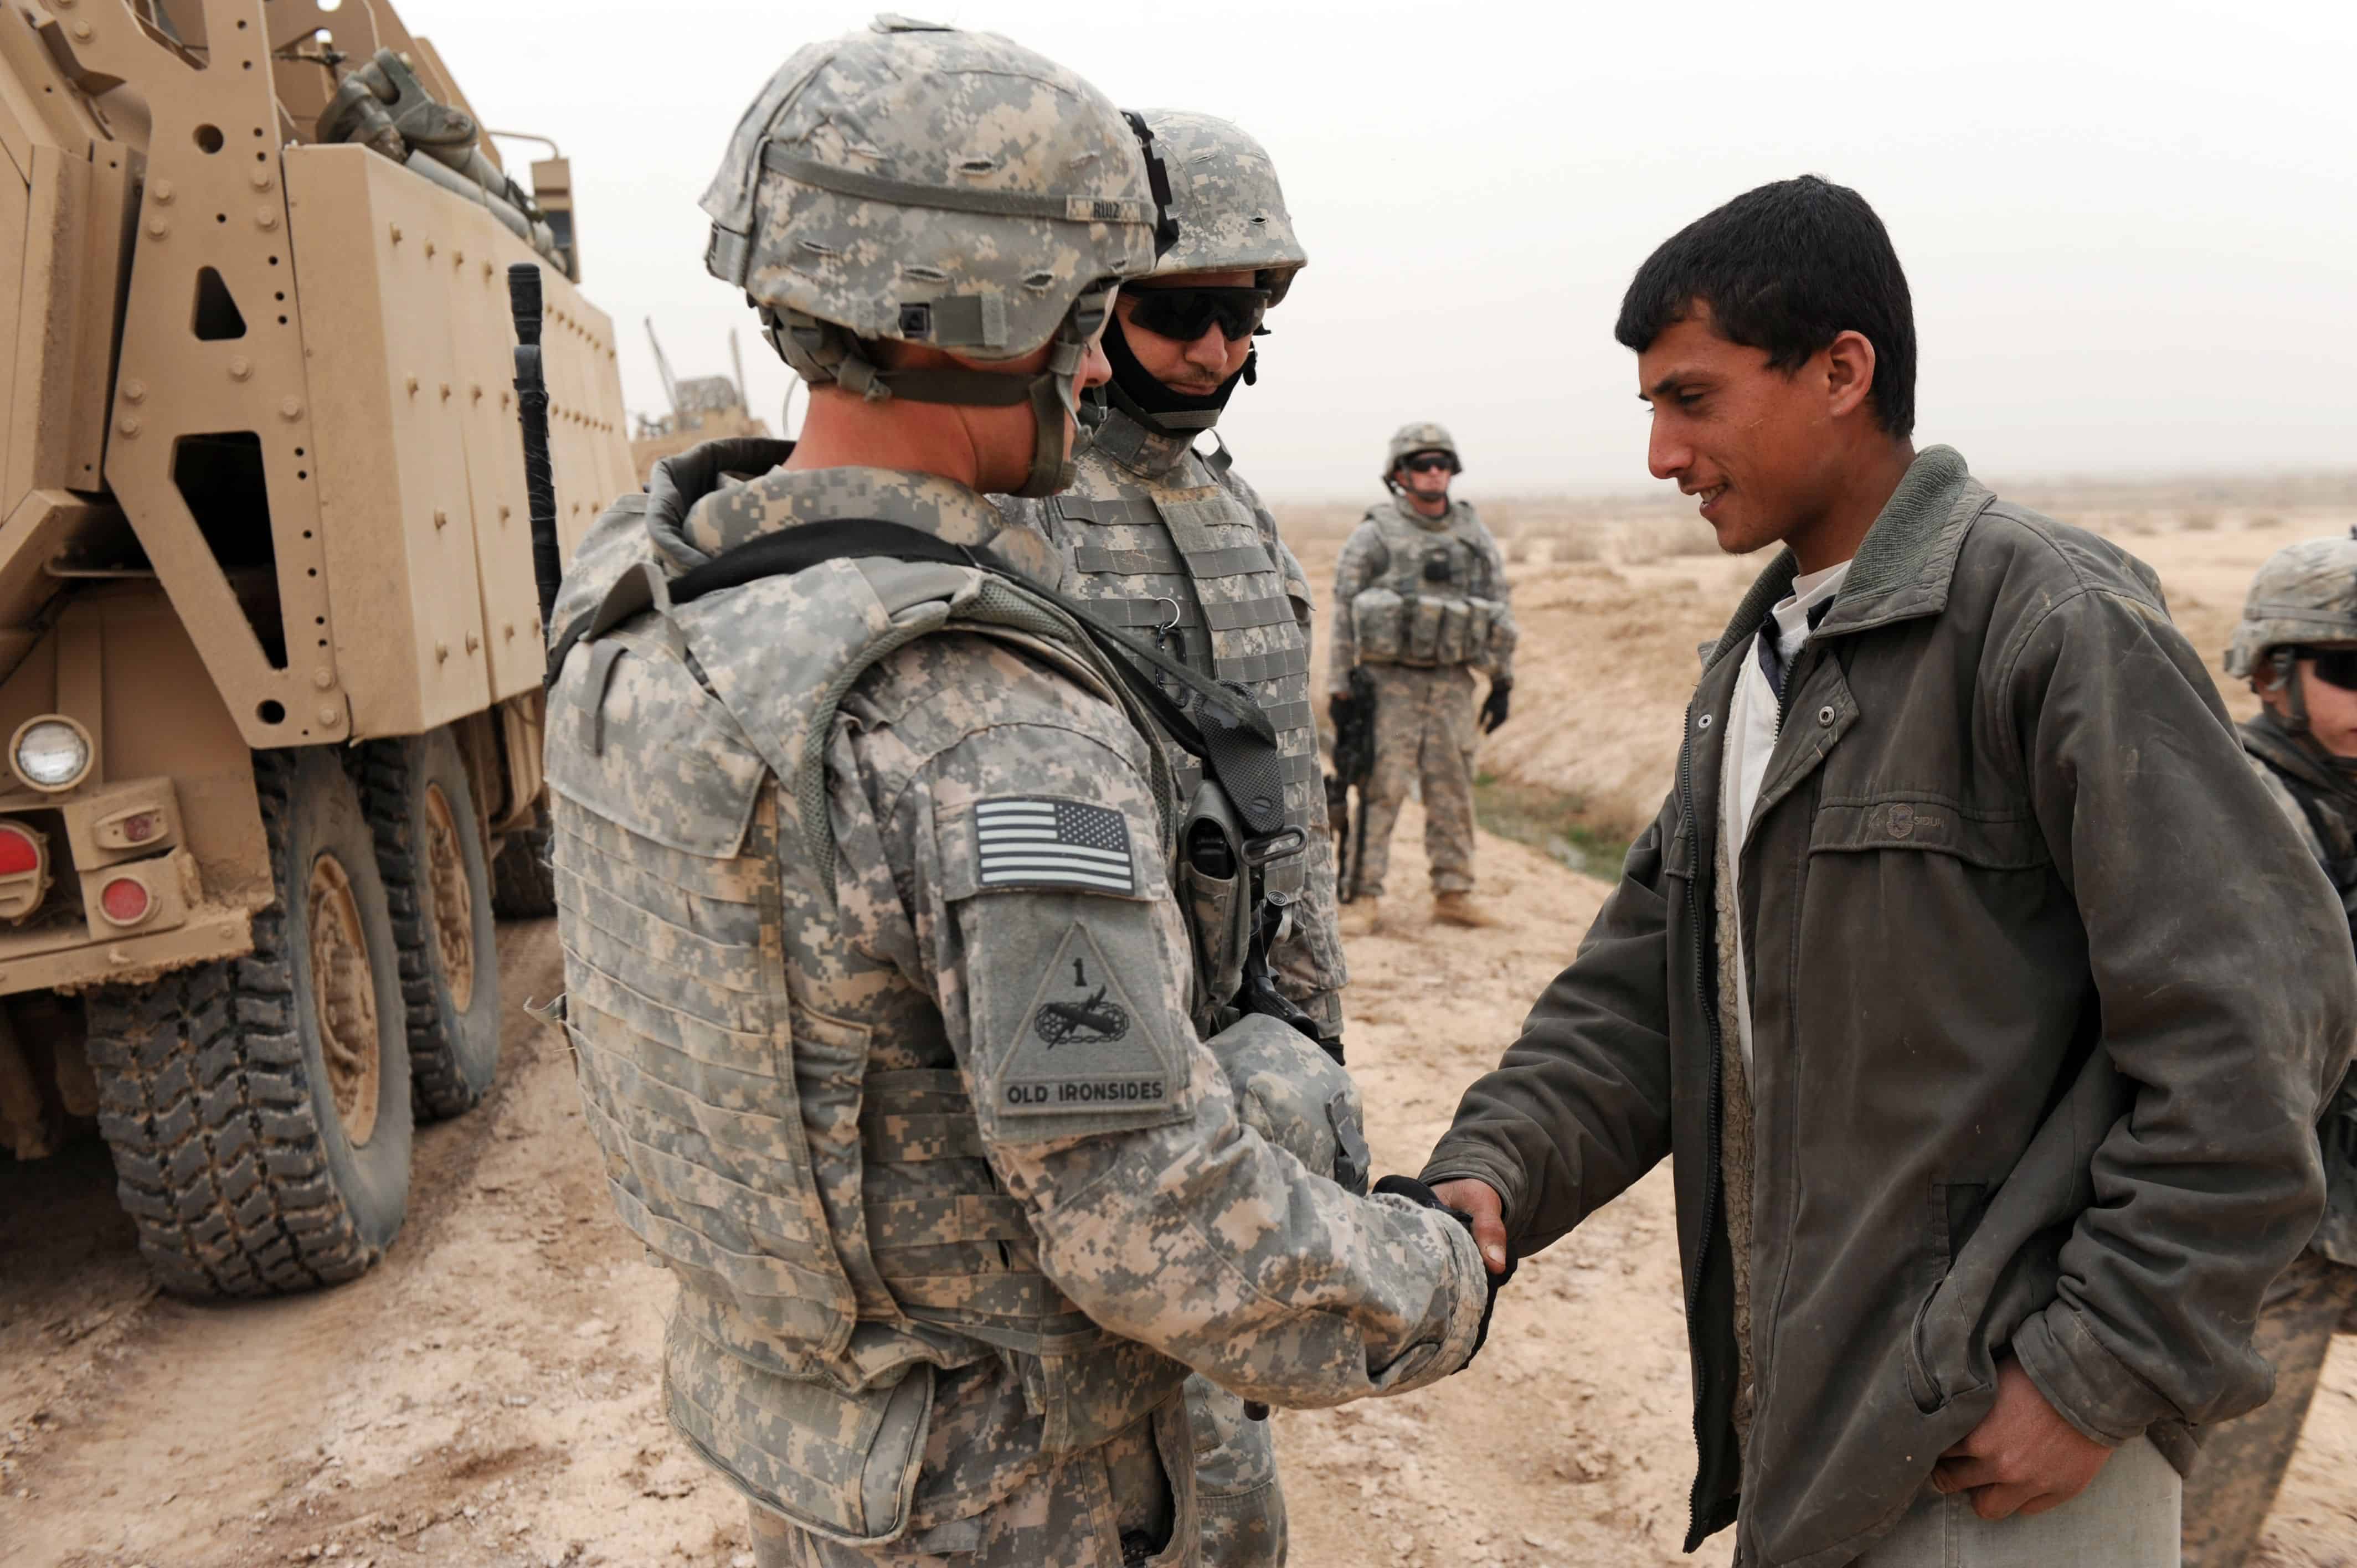 U.S. Army 1st Lt. Lorenzo Ruiz, Platoon Leader, 2nd Platoon, Bravo Company, 1st Brigade, 37th Battalion, 1st Brigade Combat Team, 1st Armored Division, from Edinburg, Texas, shakes hands with a young famer during an Indirect Fire Patrol near Al-Mustafia, Iraq, Feb. 23. U.S. Soldiers conduct IDFs to find evidence of mortar launch sites or attacks against military instillations.